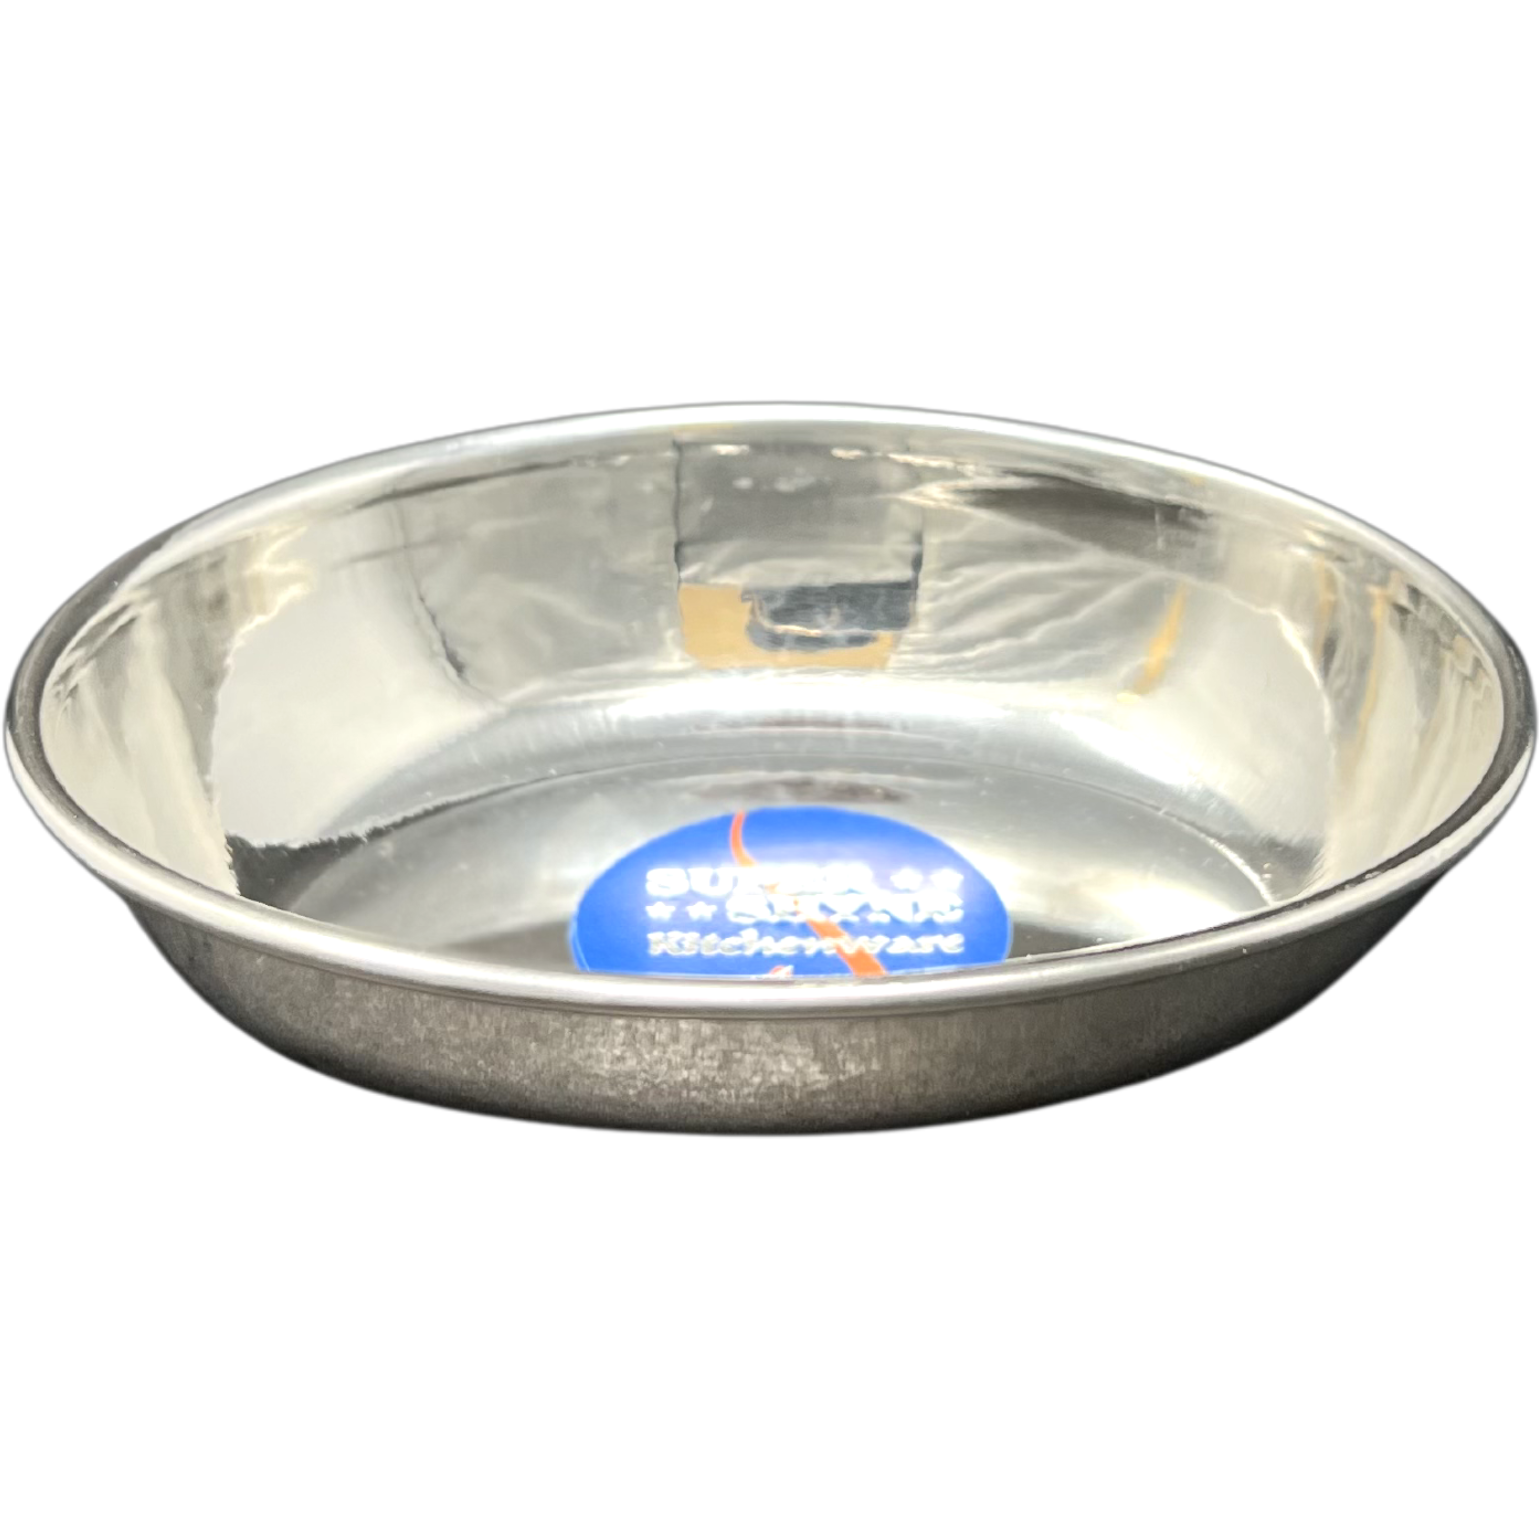 Case of 12 - Super Shyne Stainless Steel Shallow Bowl - 4 Inch